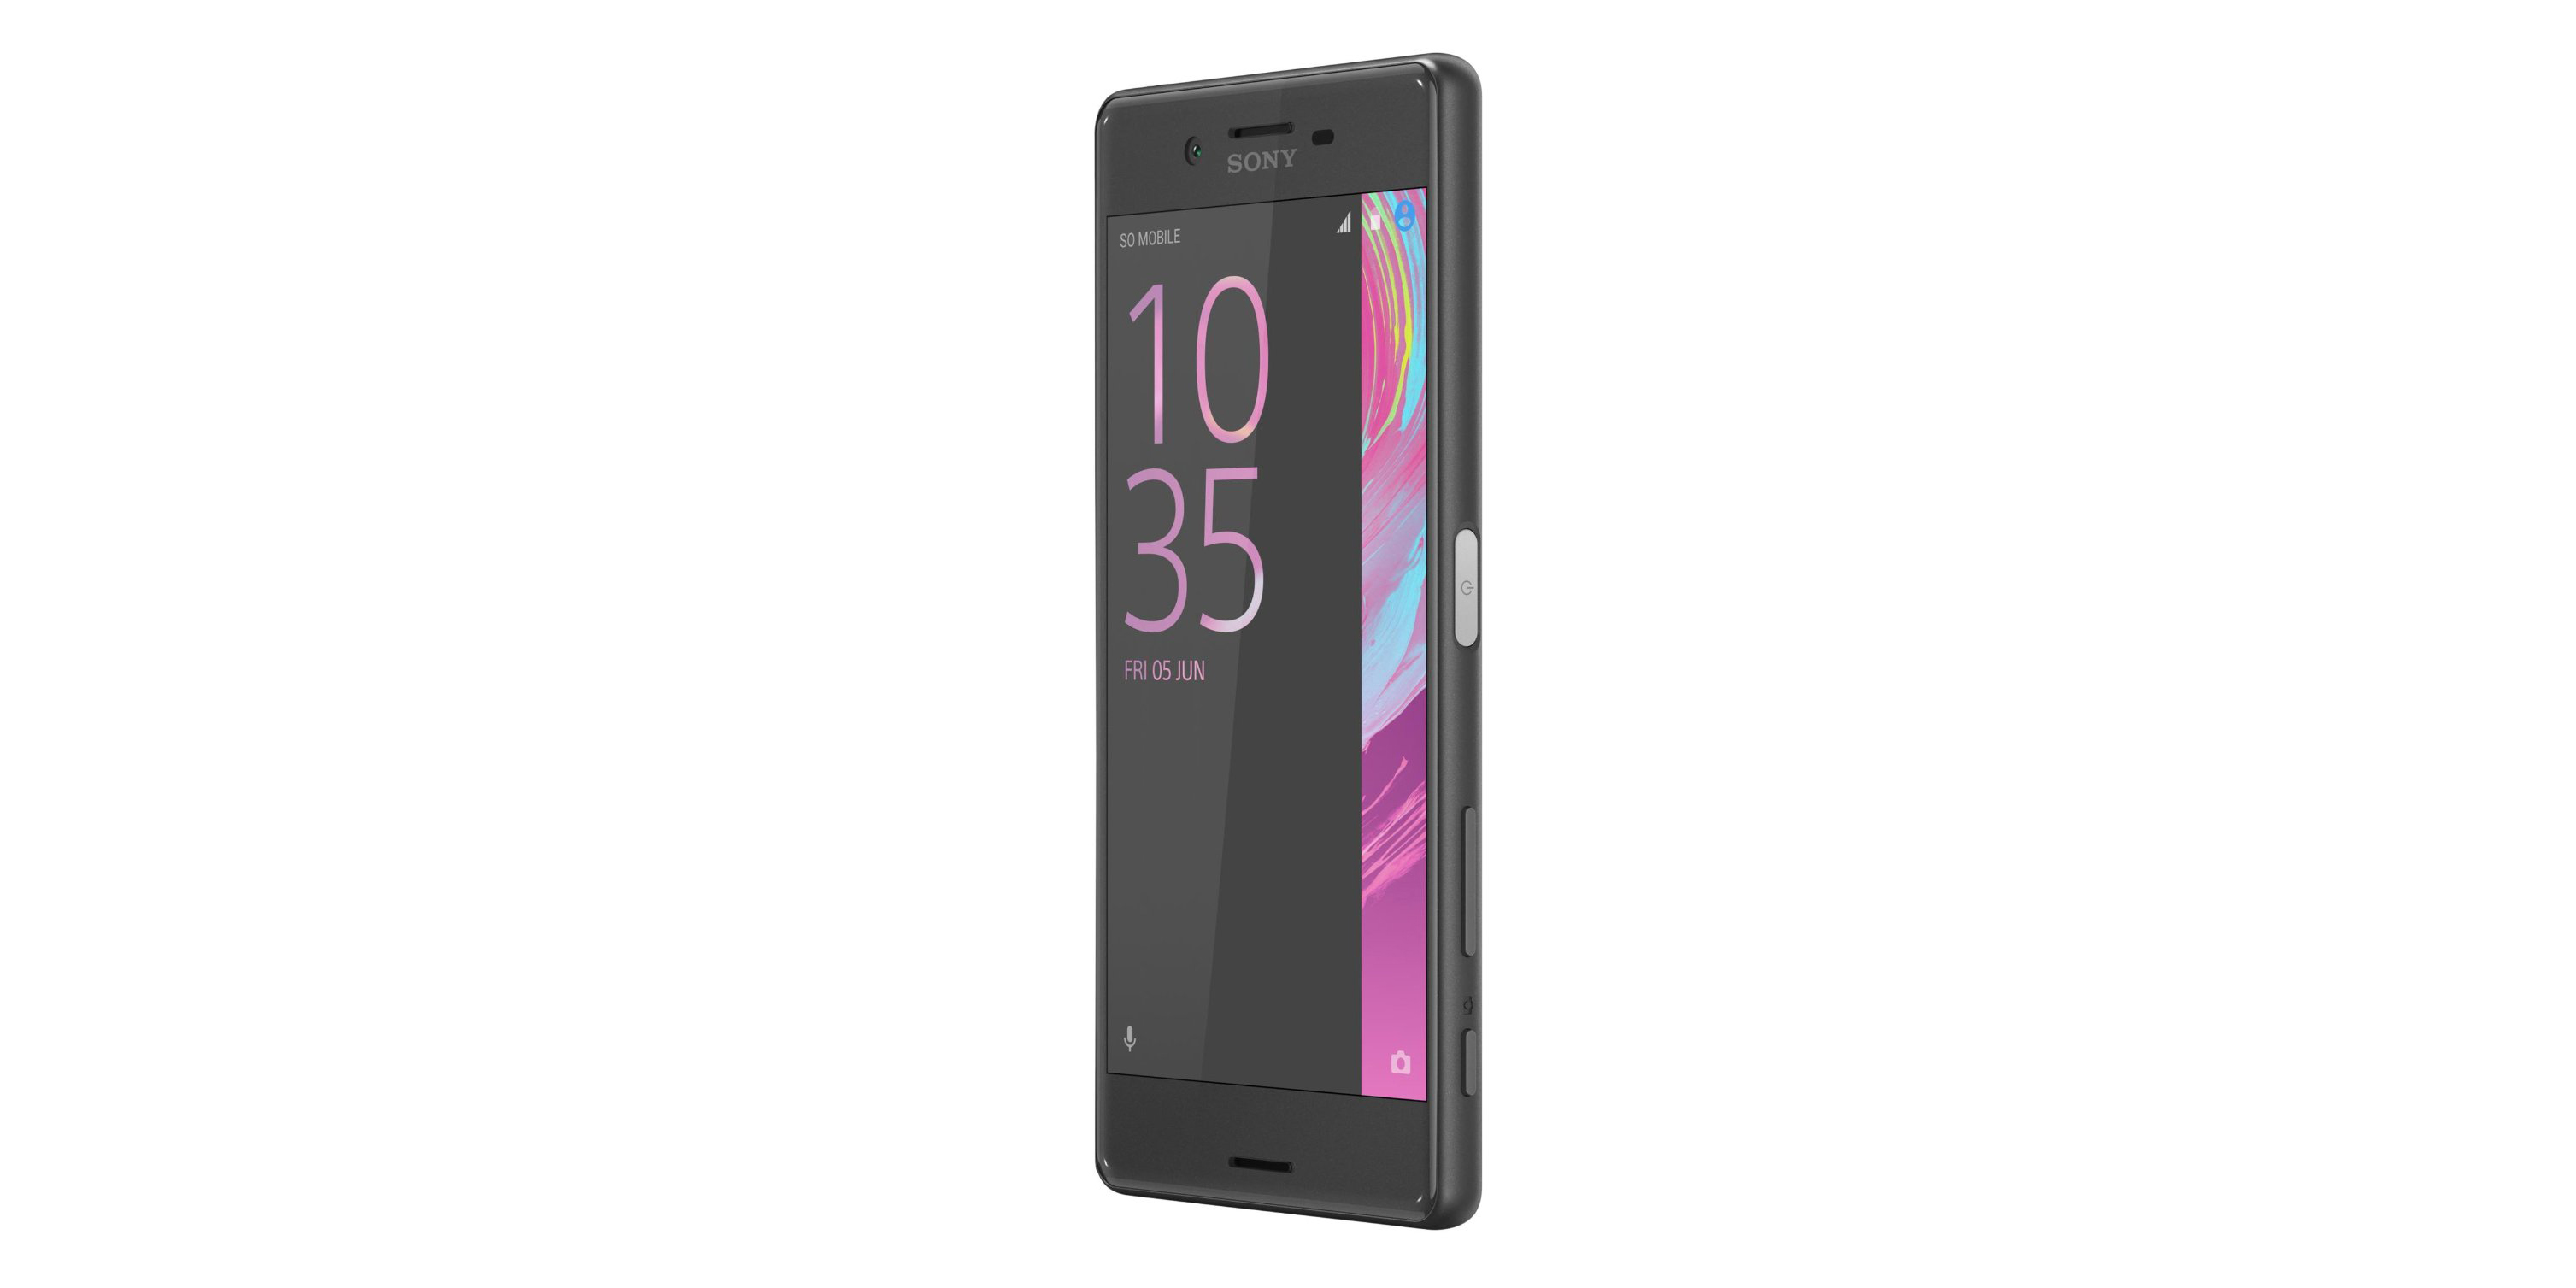 strelen Overeenkomend knoflook Sony Xperia X 32GB 4G Android Smartphone (unlocked) for $270 shipped (Reg.  $350+) - 9to5Toys